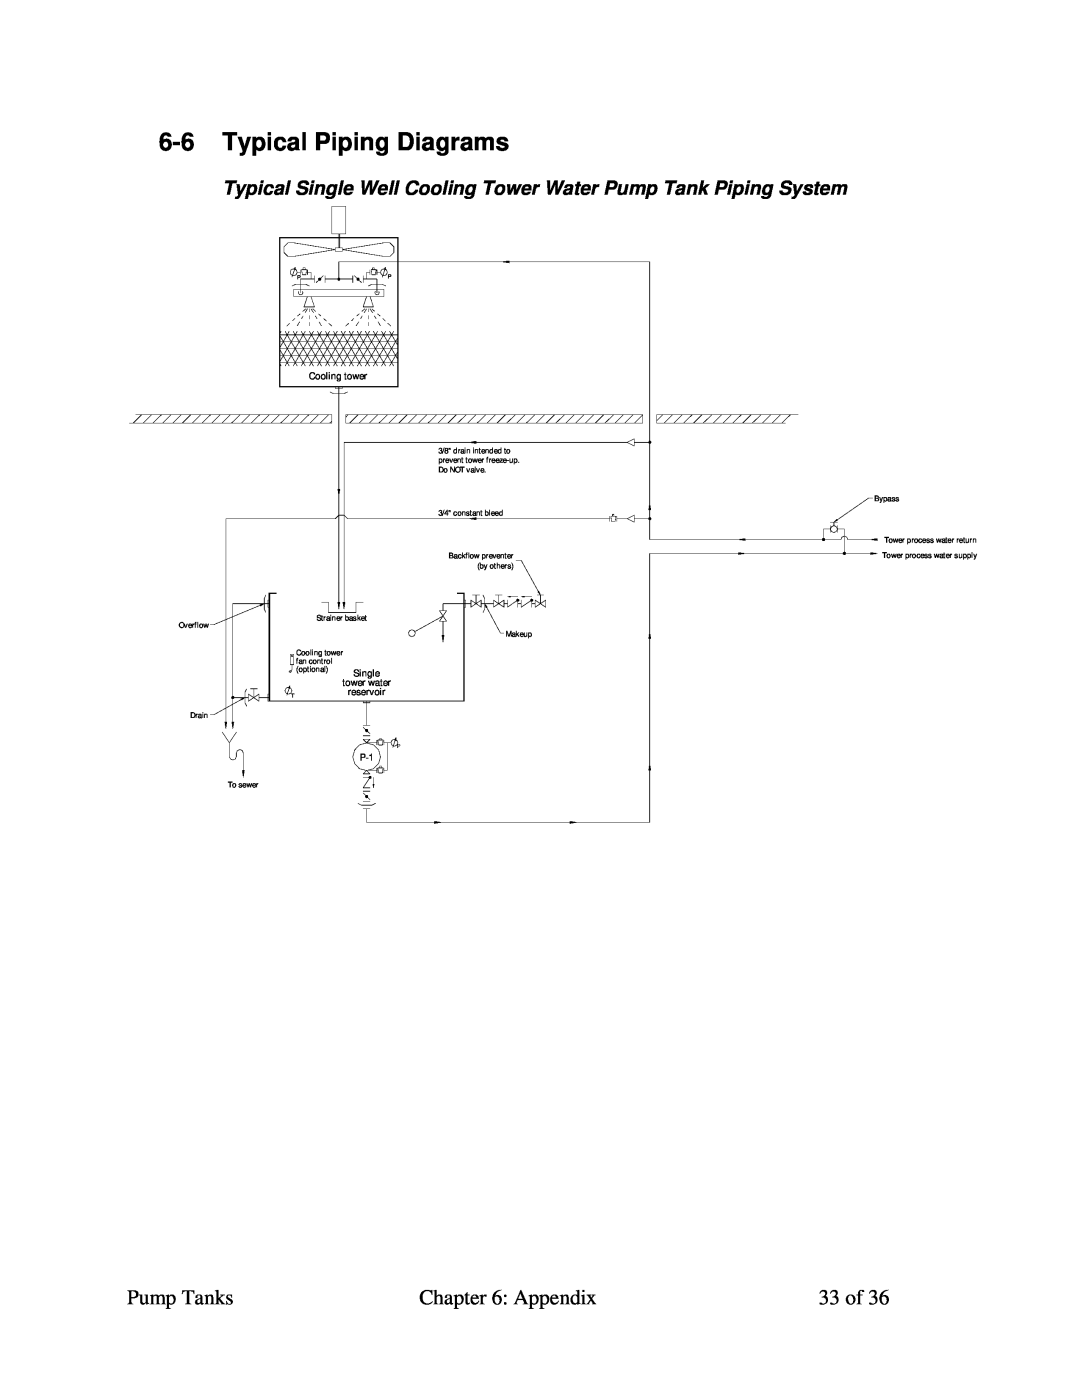 Sterling A0552321 Typical Piping Diagrams, Typical Single Well Cooling Tower Water Pump Tank Piping System, Cooling tower 